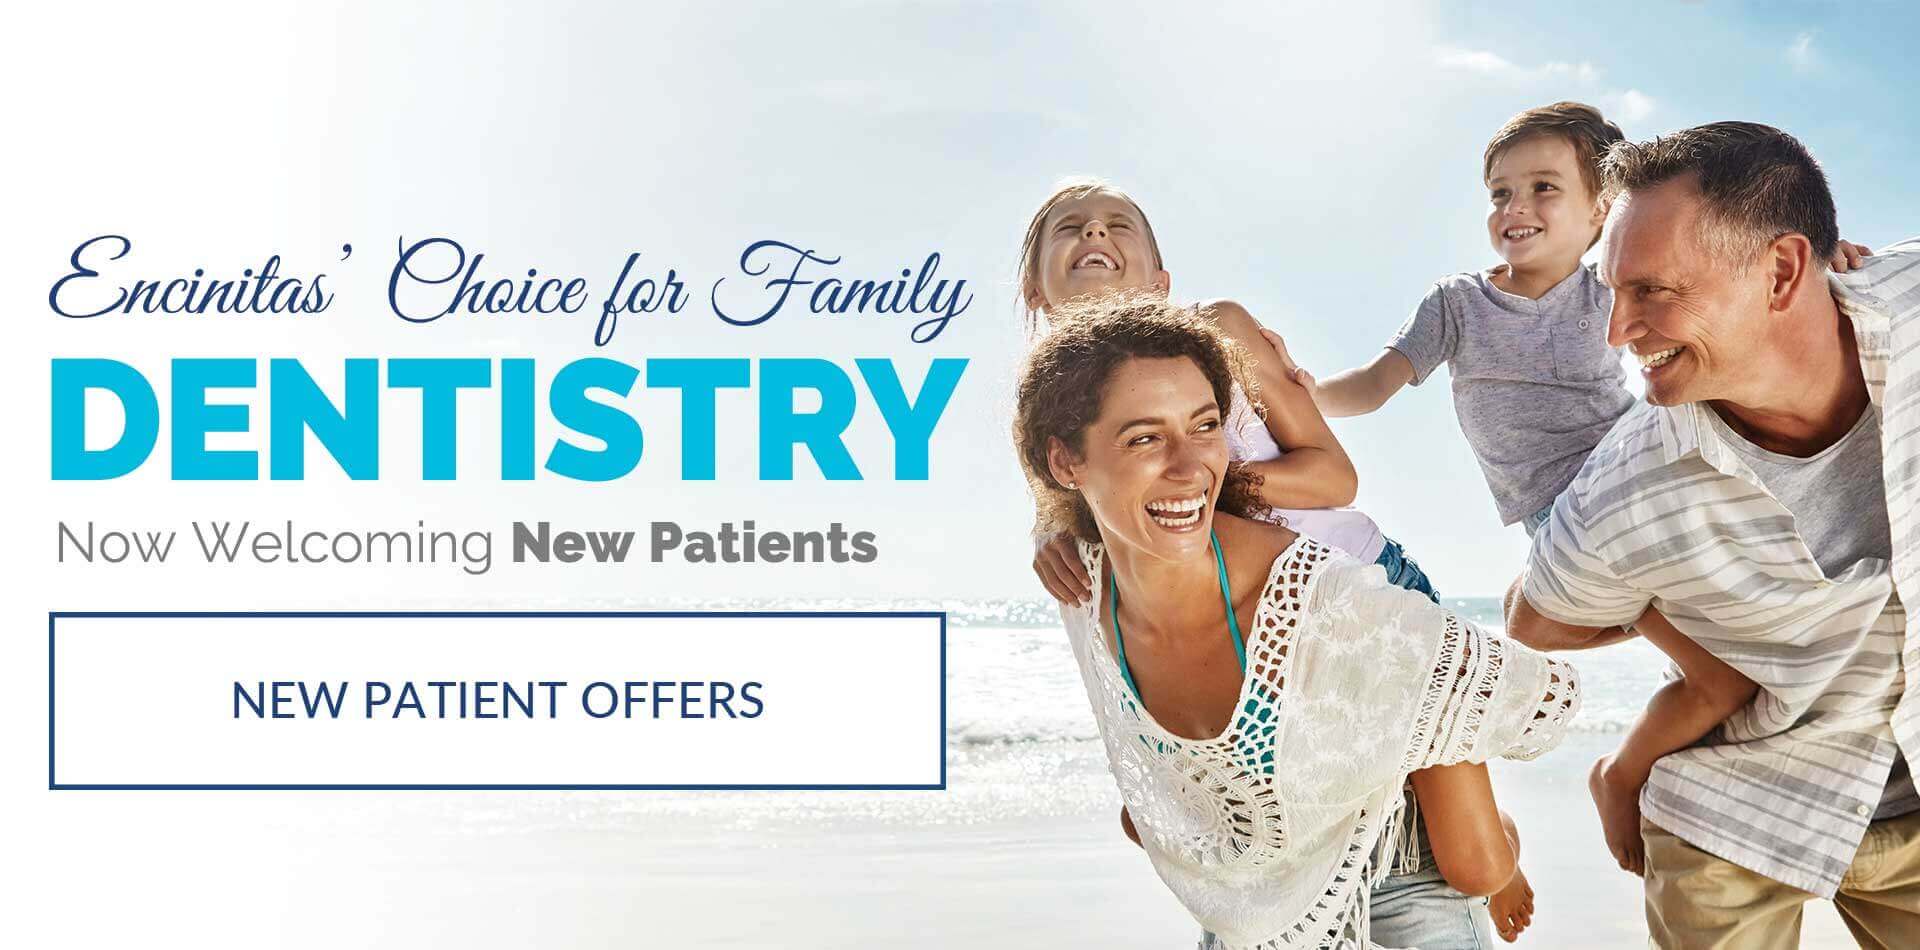 Encinitas' choice for family dentistry - Now welcoming new patients.